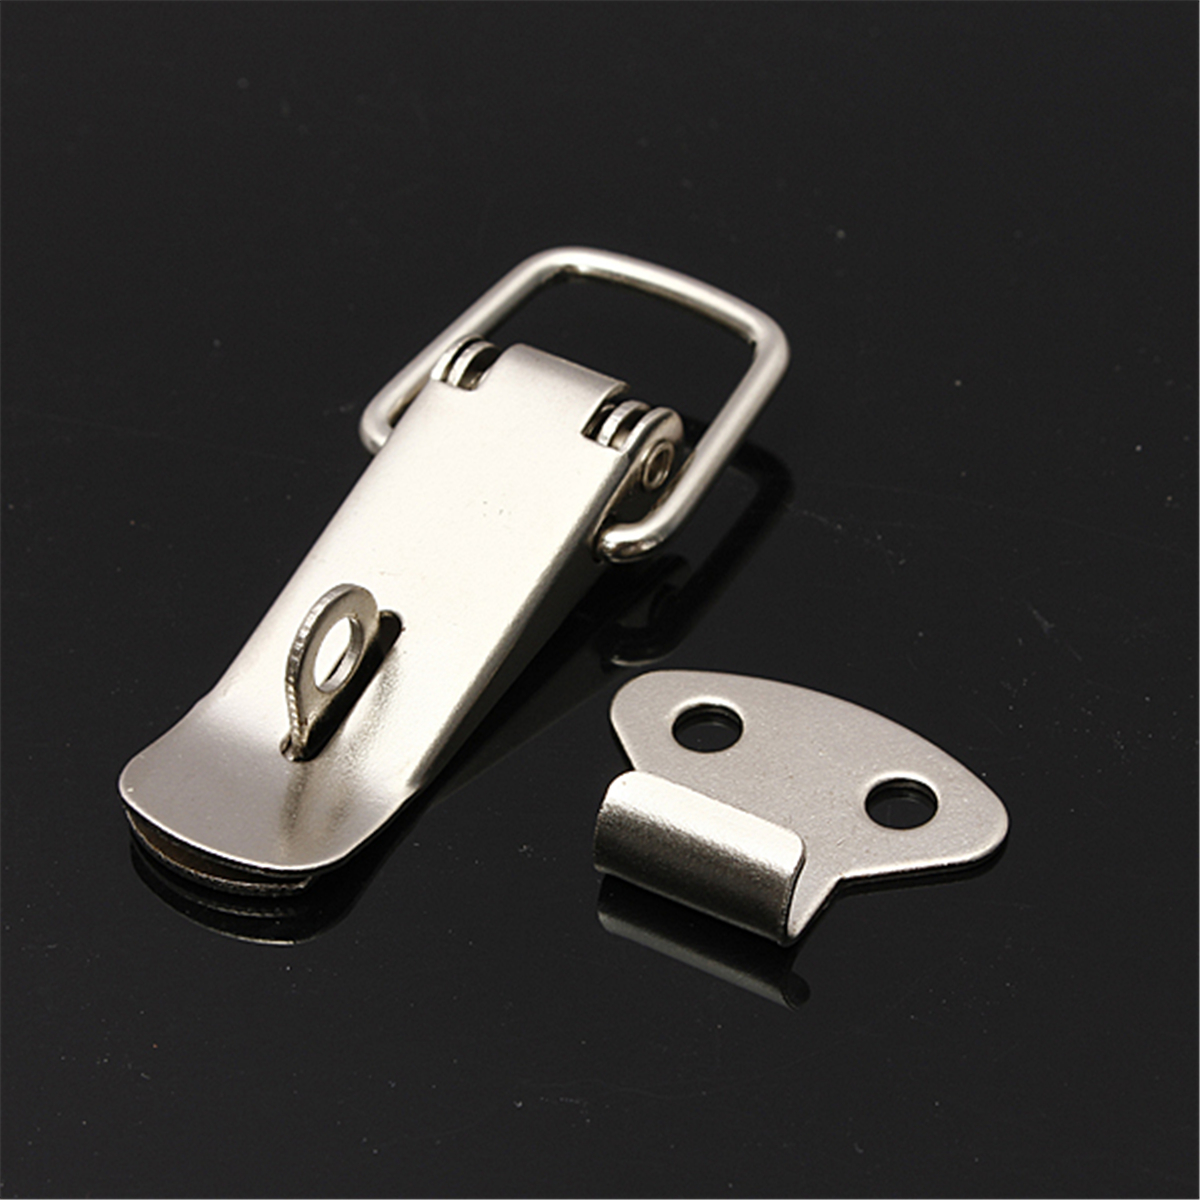 4PCS-Case-Box-Chest-Spring-Stainless-Tone-Lock-Toggle-Latch-Catch-Clasp-948011-9